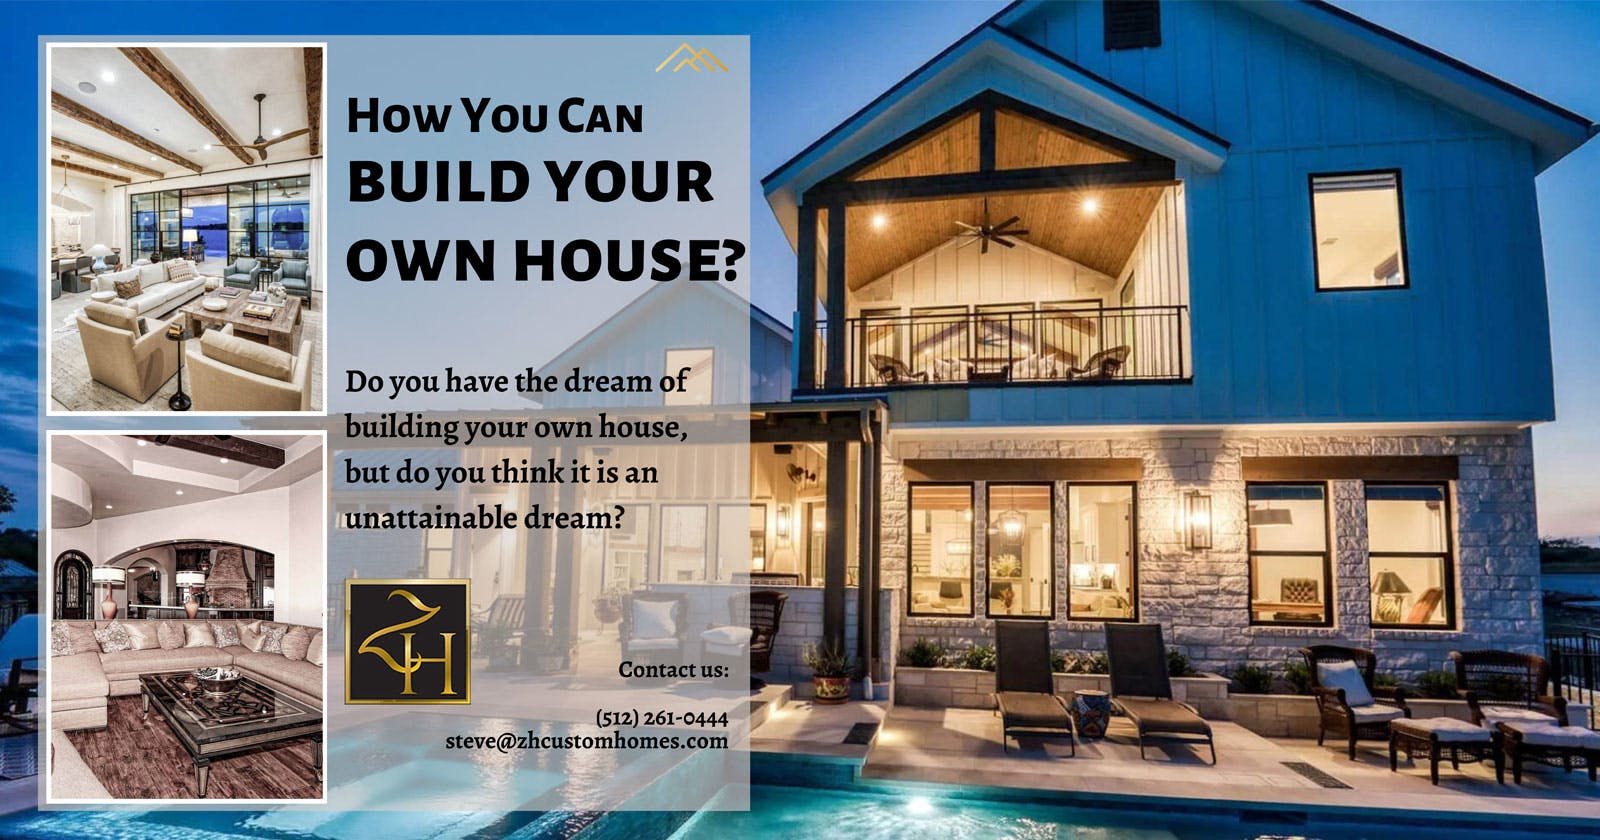 How can you build your own house?